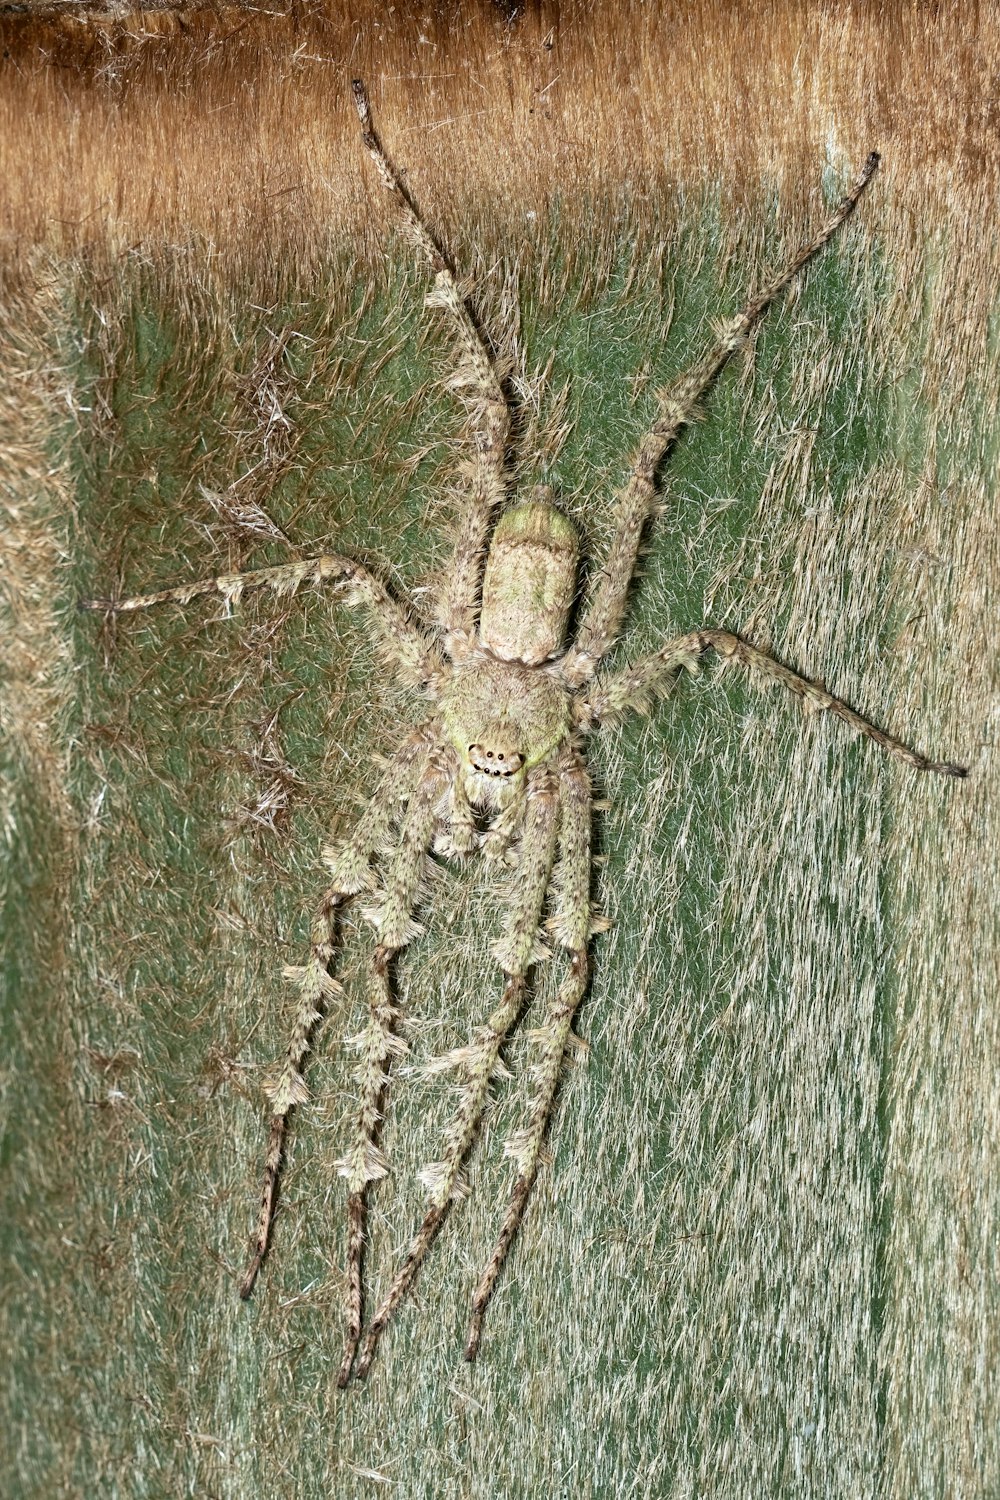 a picture of a spider in the grass